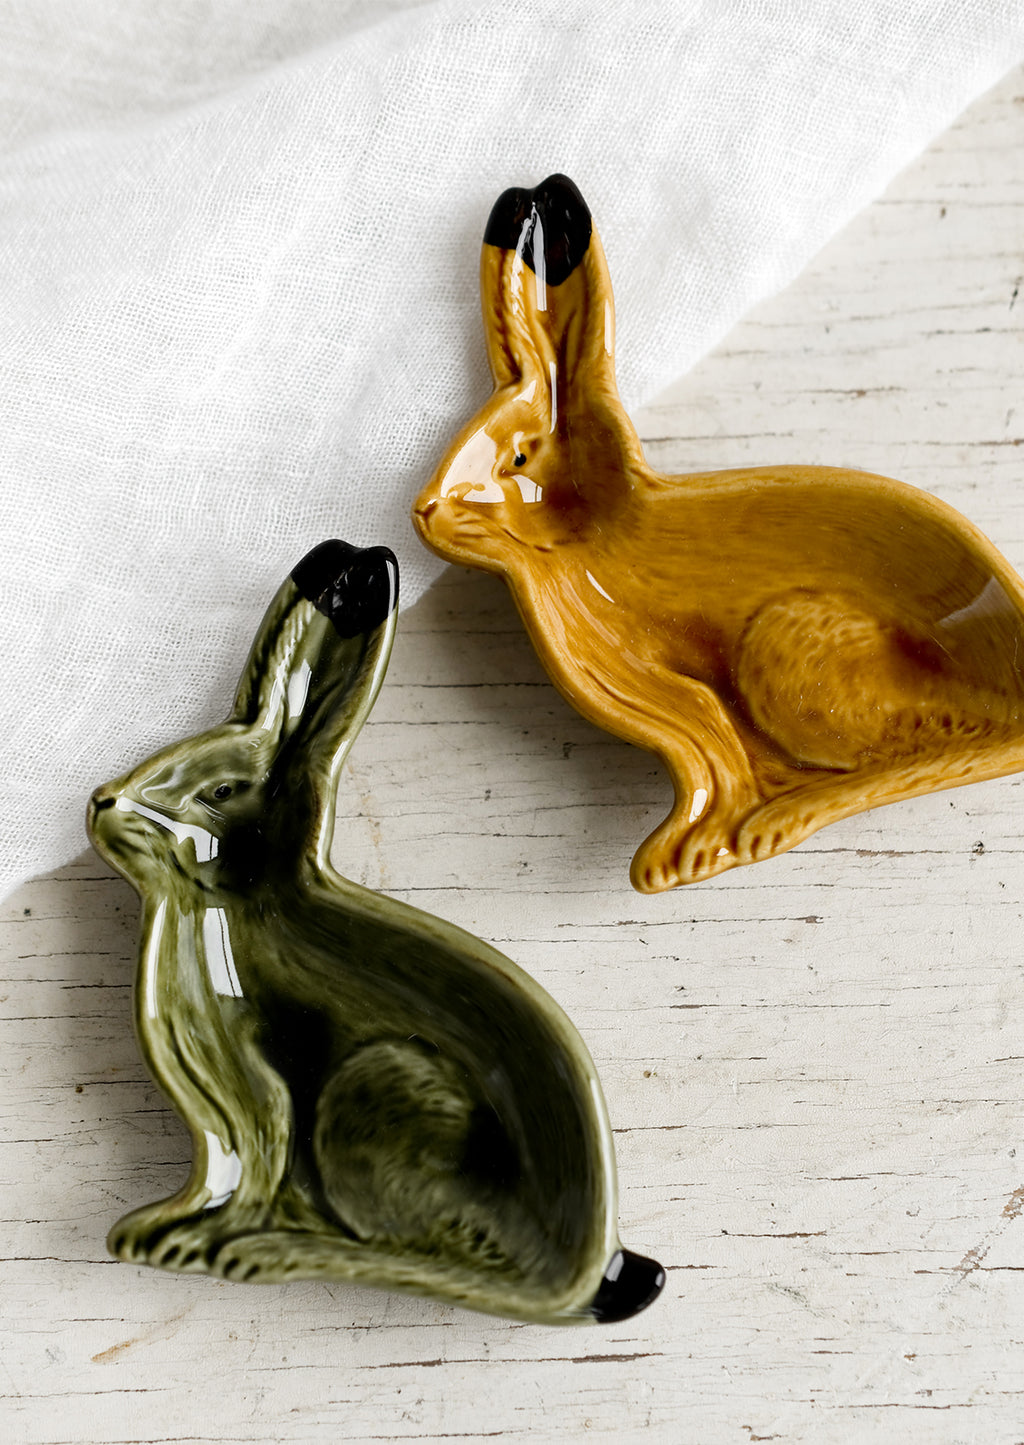 2: Rabbit shaped trinket dishes in green and brown.